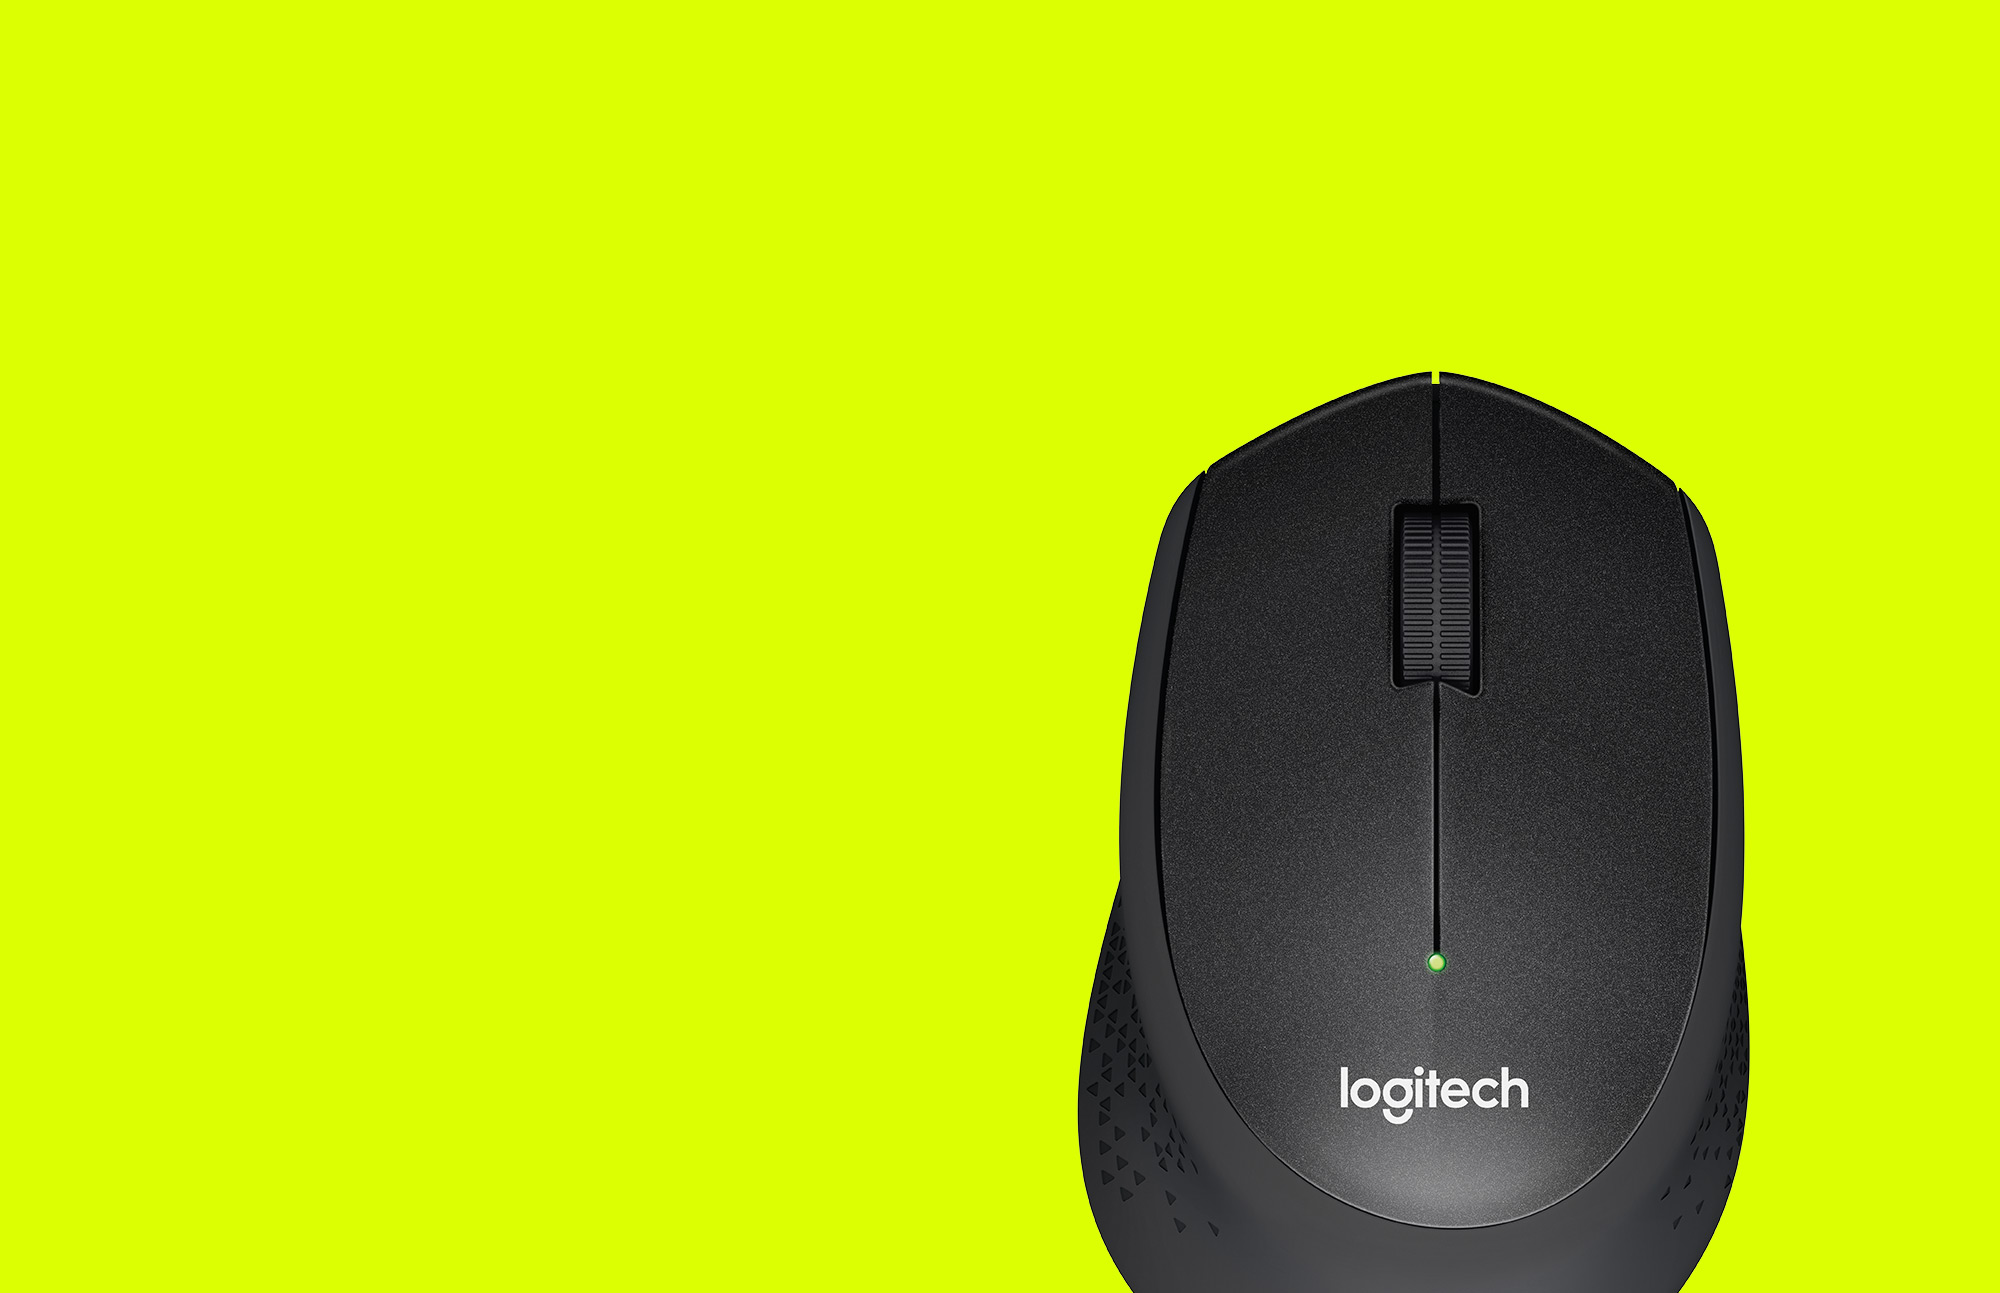 Logitech M331 Wireless Mouse - Silent (Blue) 1000 Dpi for Laptop Pc Mac at Best Price in Pakistan. Office Mouse. Official Brand Warranty.